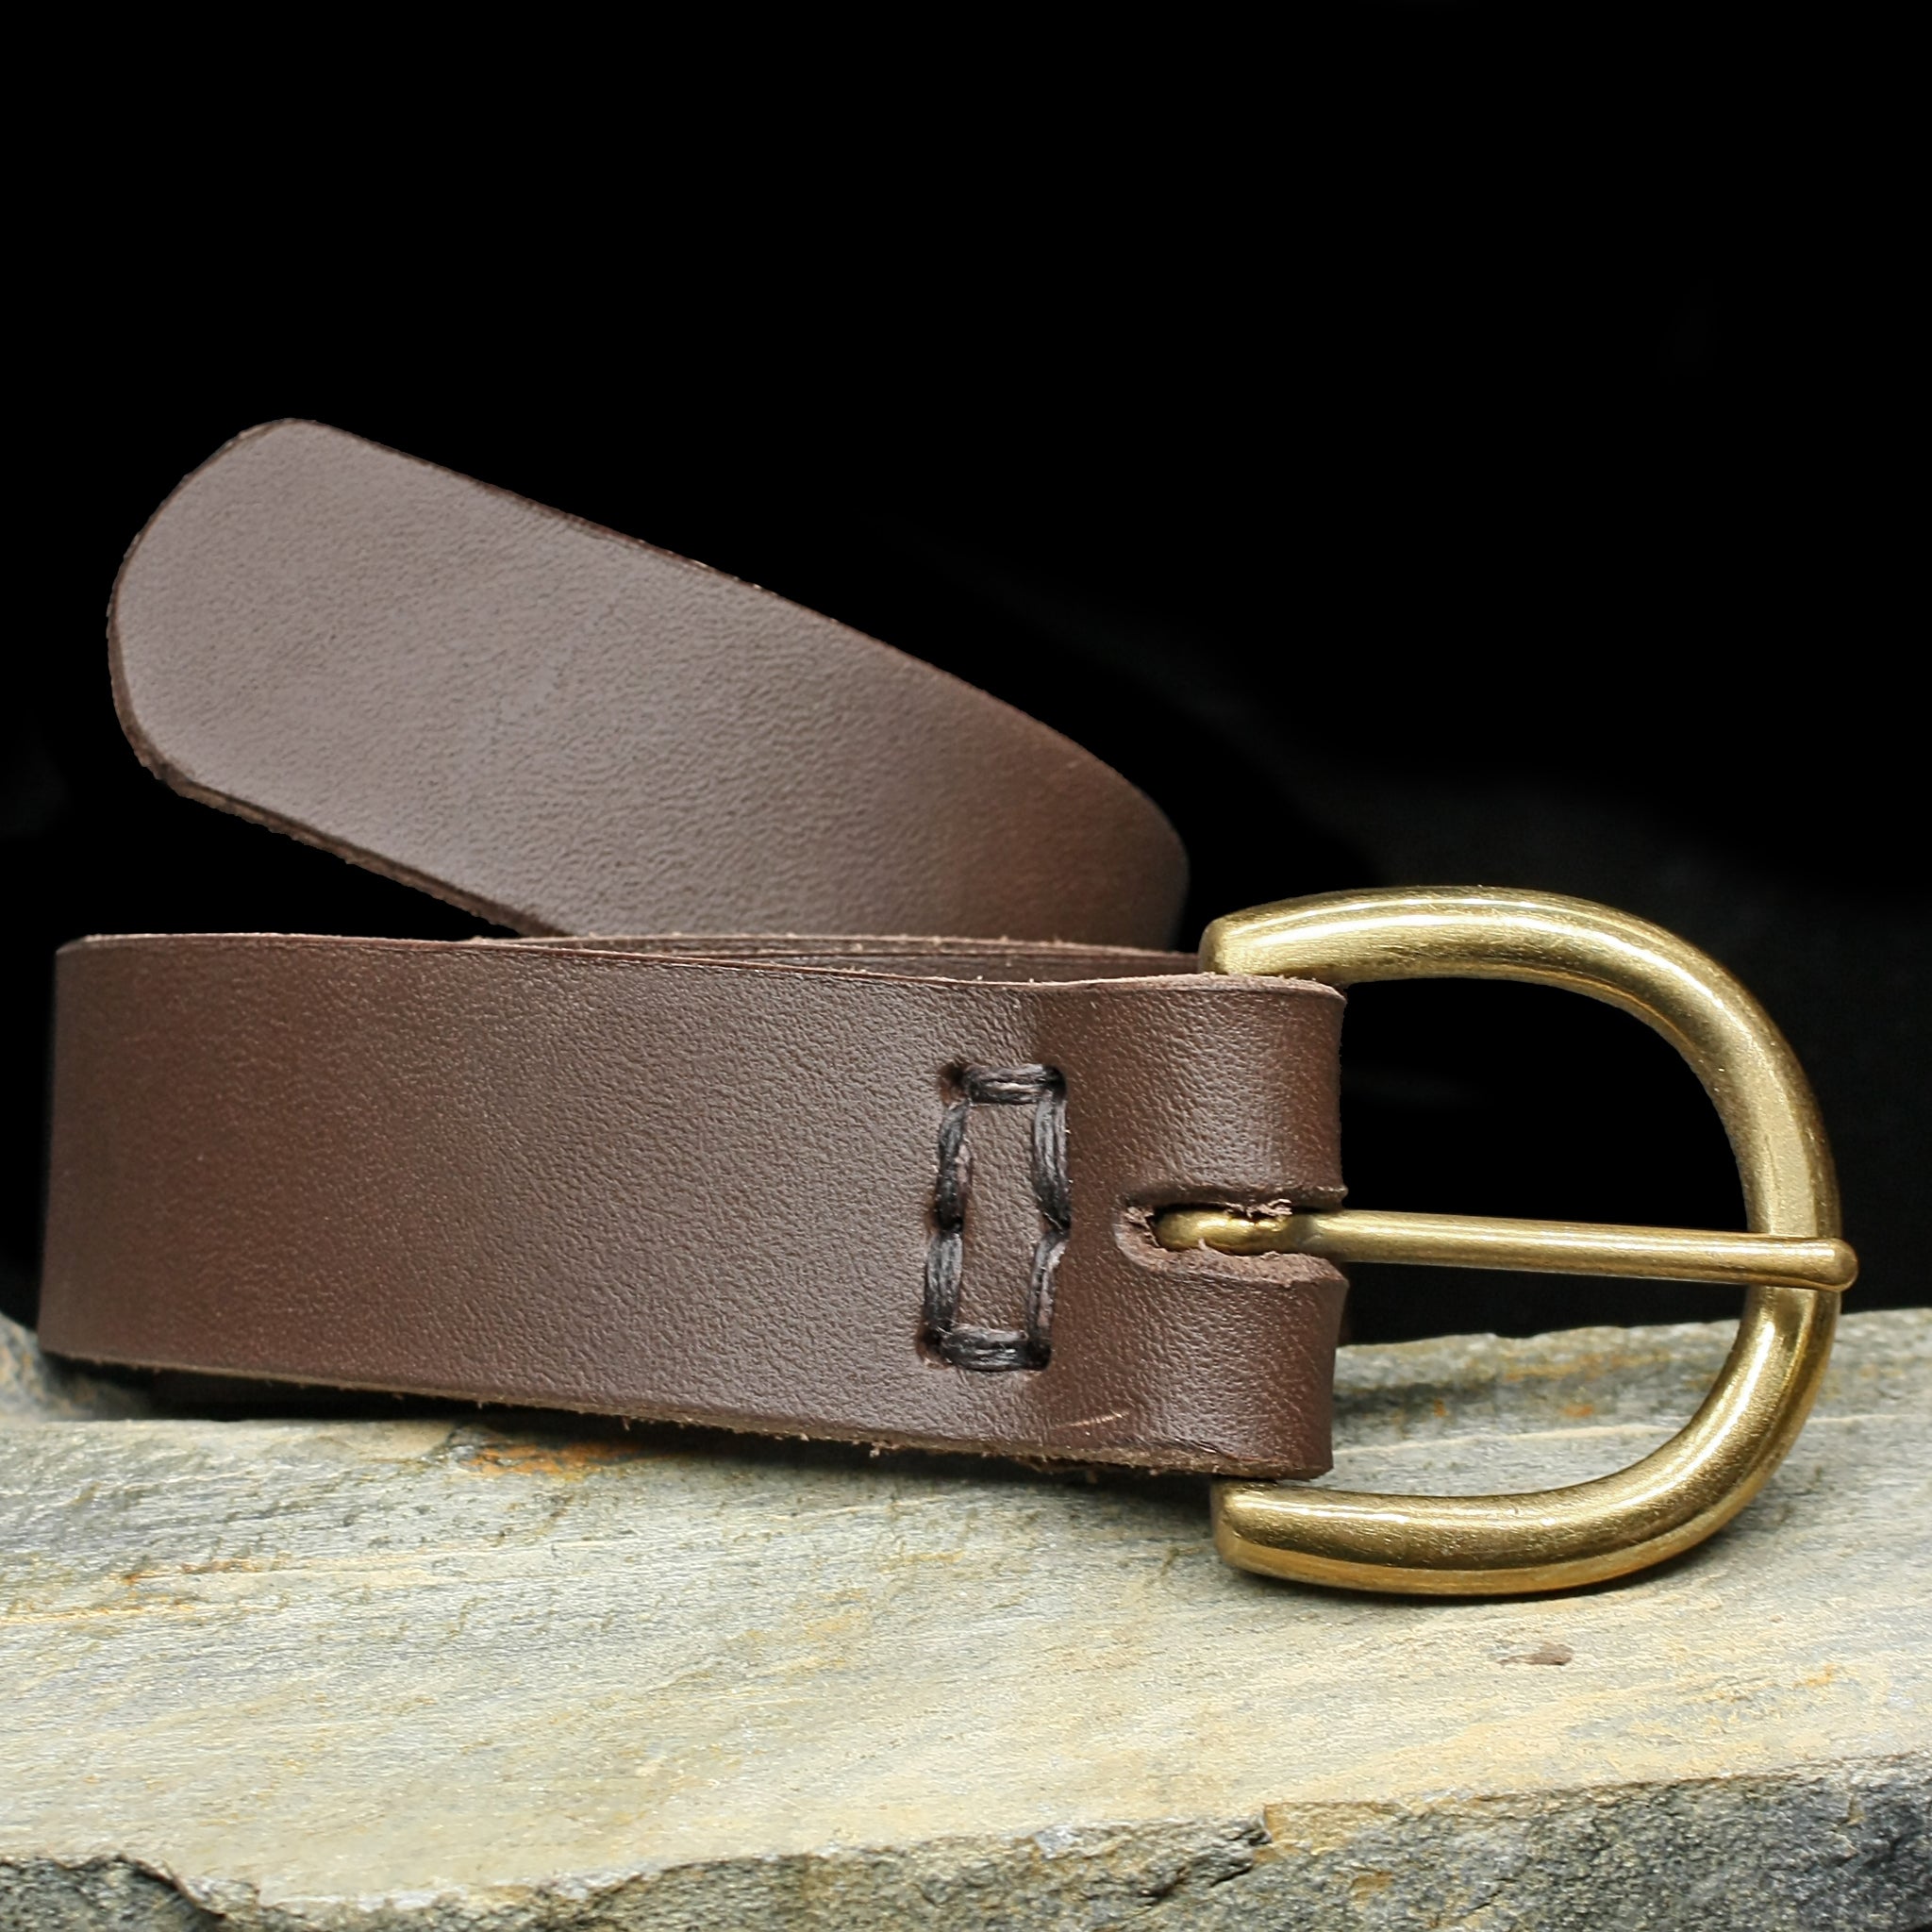 32mm (1 1/4 inch) leather Viking belt with brass buckle - Brown